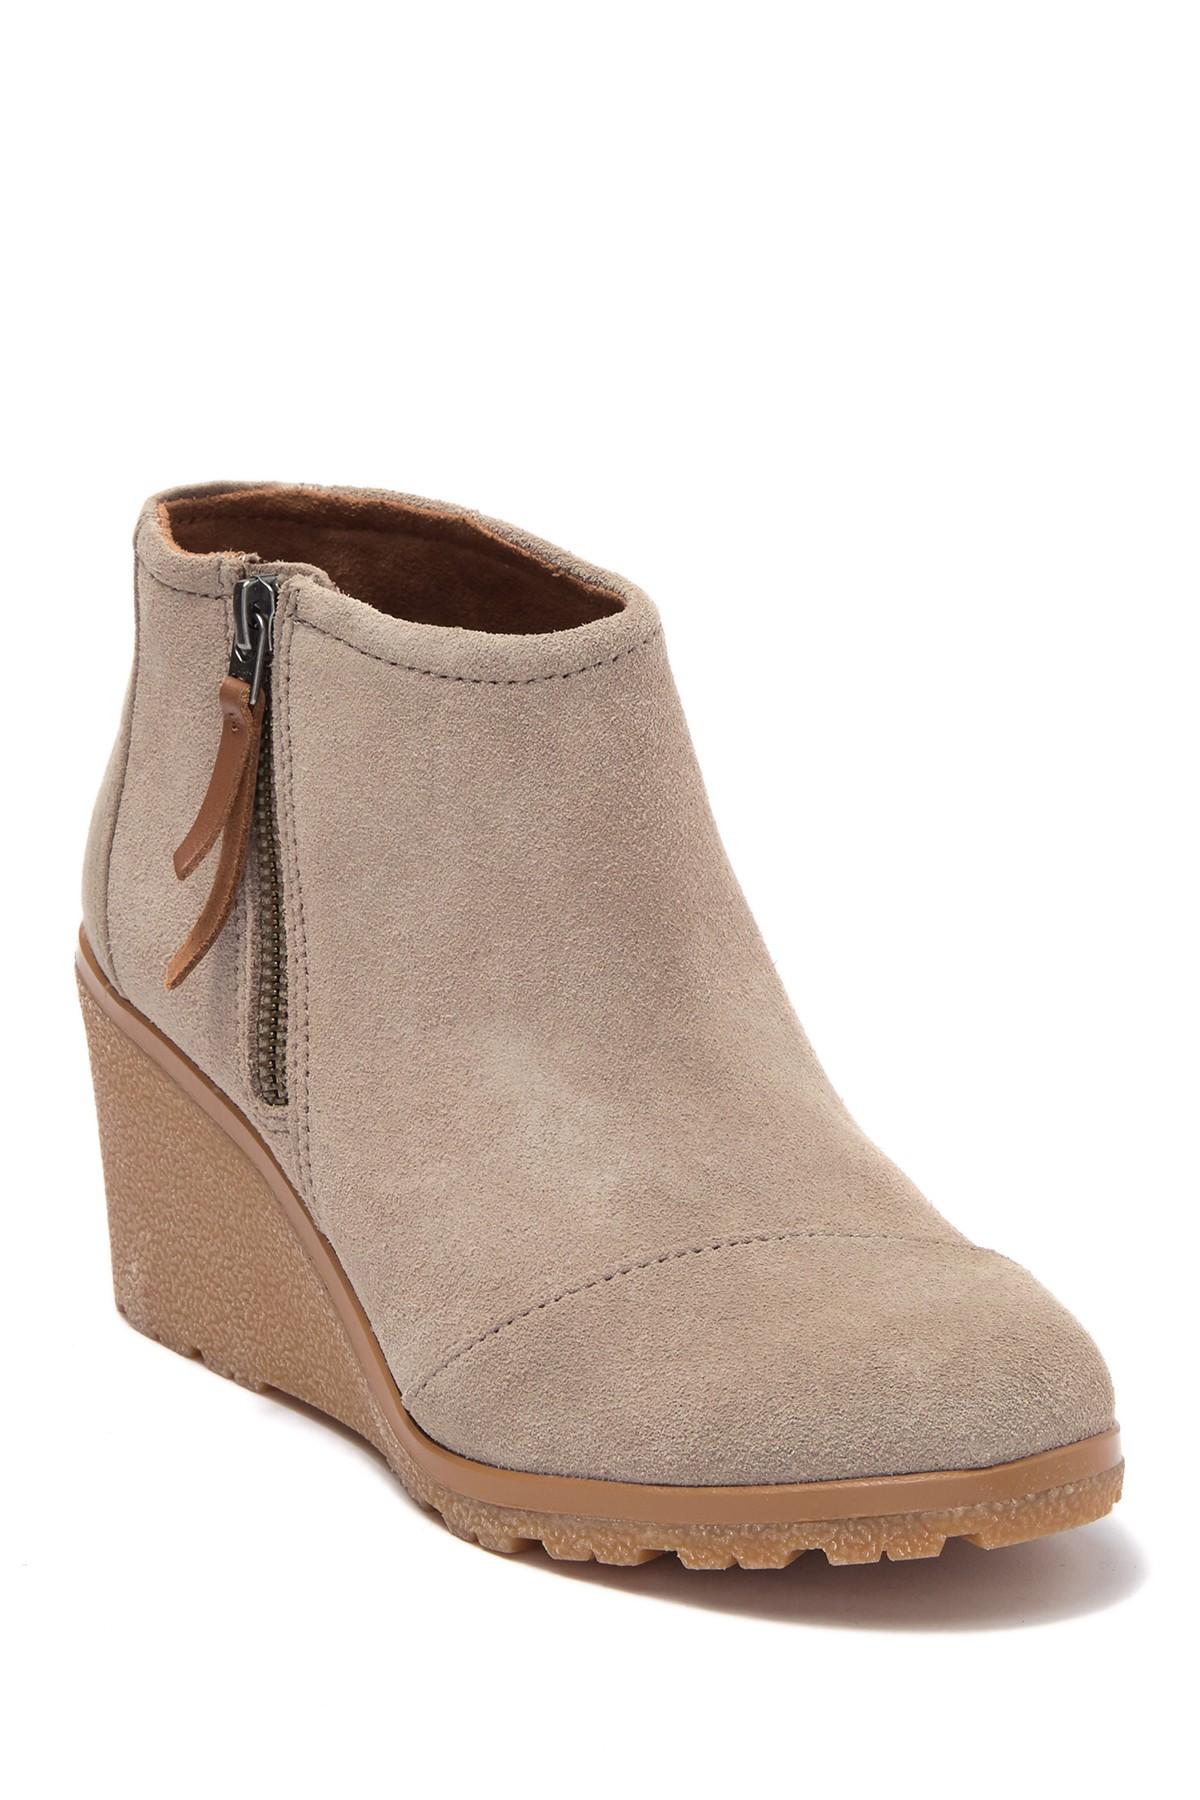 TOMS Avery Suede Wedge Bootie in Brown - Lyst